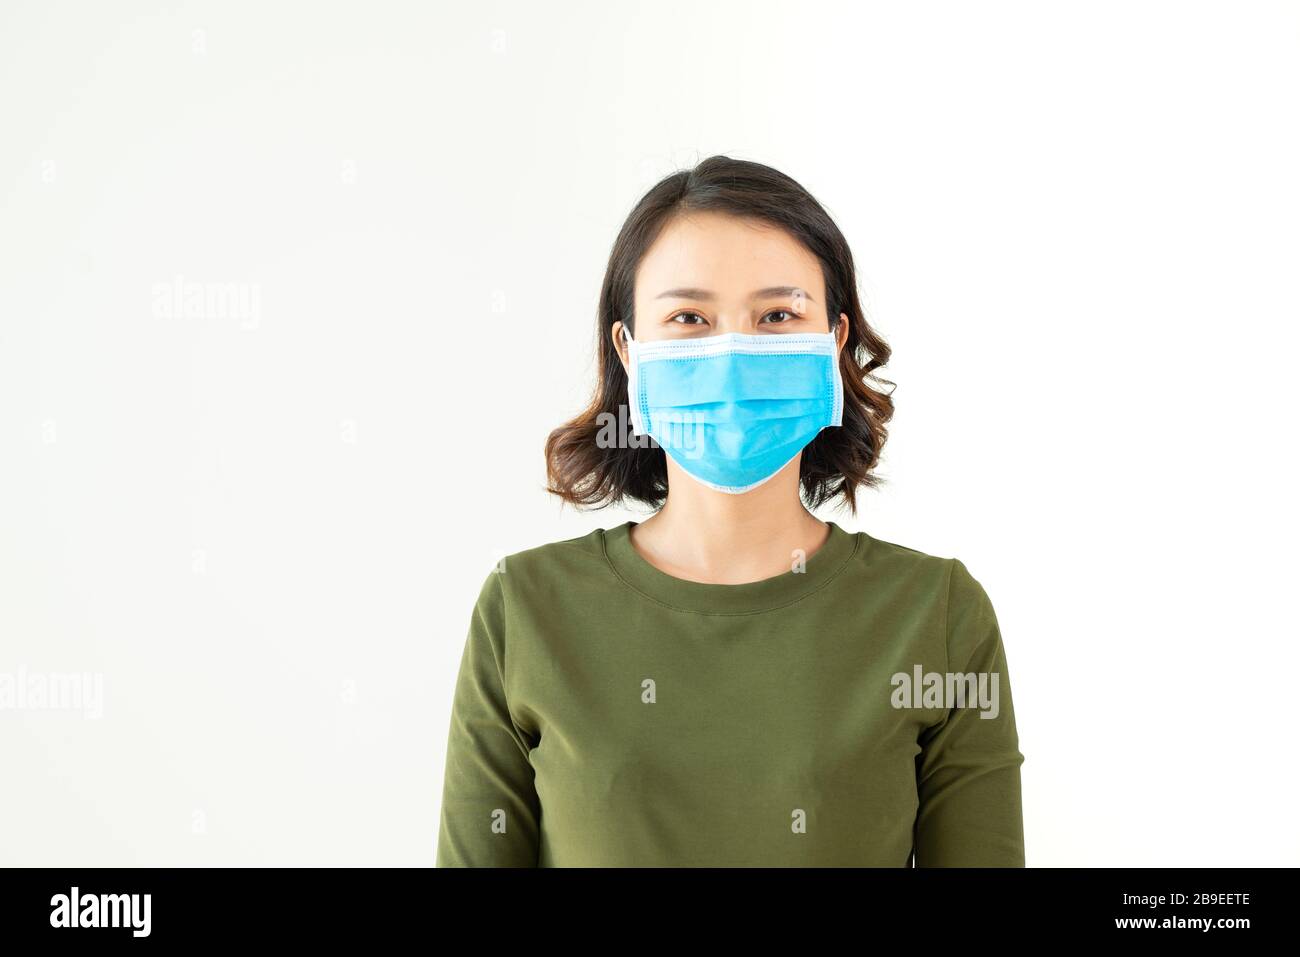 Asian woman wearing facial mask for protection from air pollution or virus epidemic on white background Stock Photo